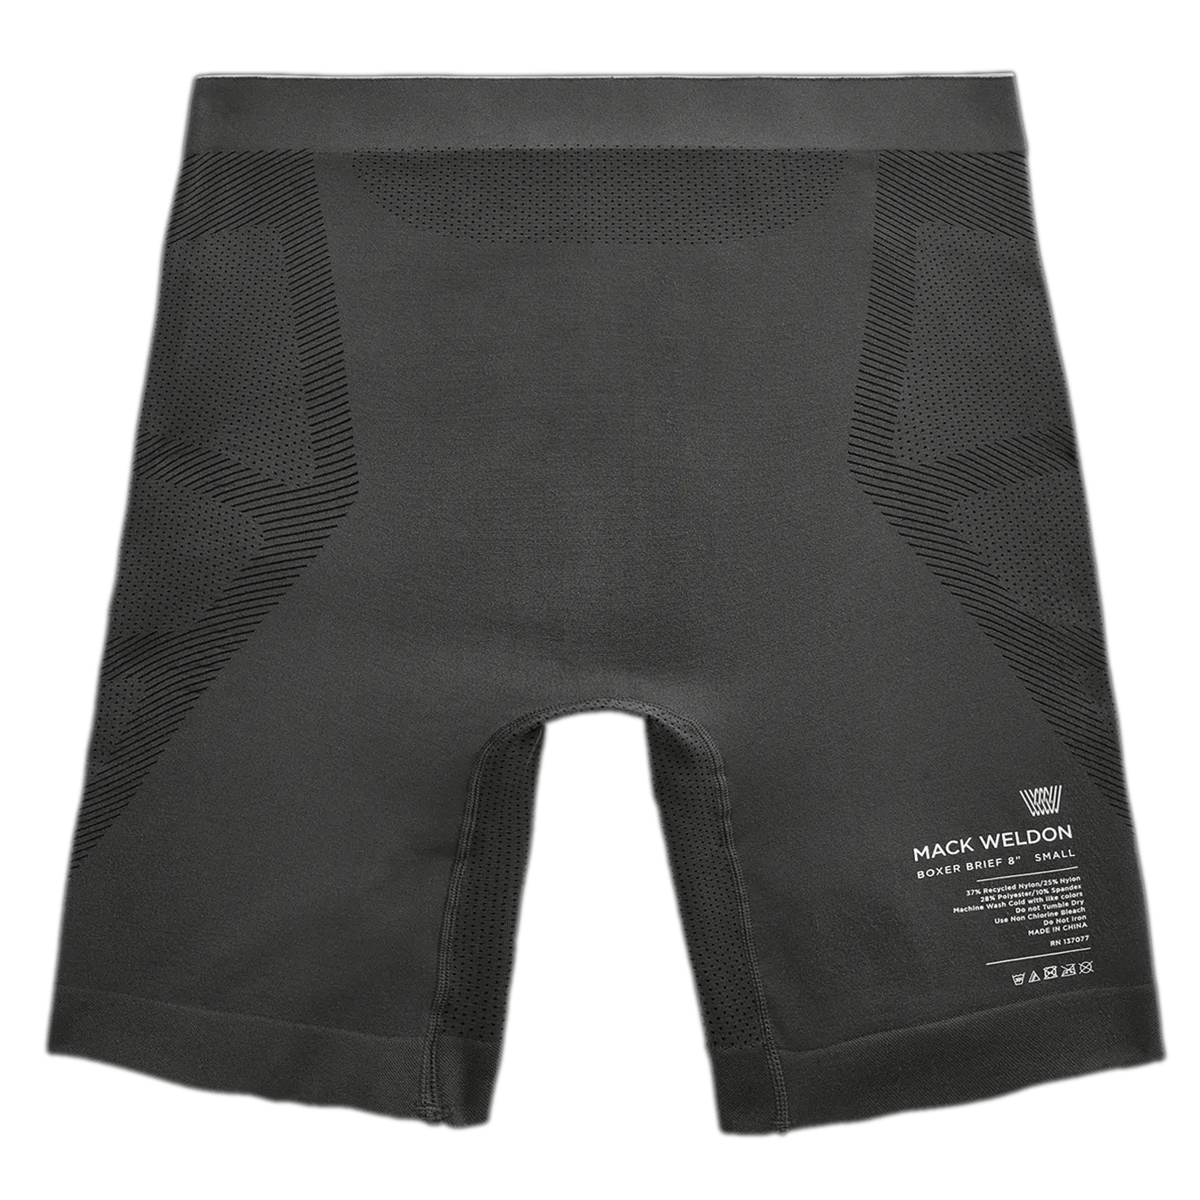 NWOT Two Pack of Black 18-Hour Boxer Briefs from Mack Weldon, Size Small